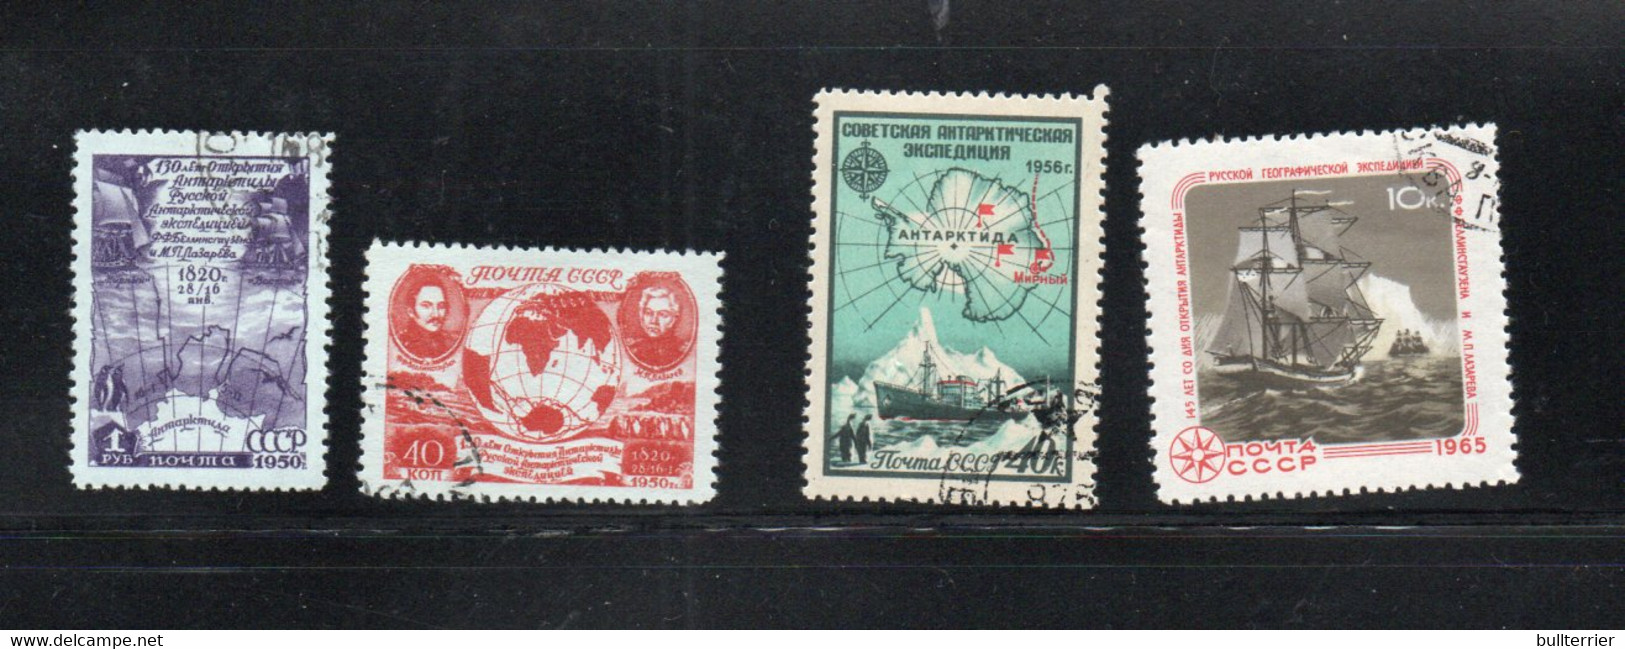 POLAR RESEARCH - RUSSIA - SELECTION OF 4 STAMPS  INC 1950  EXPEDITION SET OF 2 FINE SUED, SG CAT £75 - Events & Commemorations